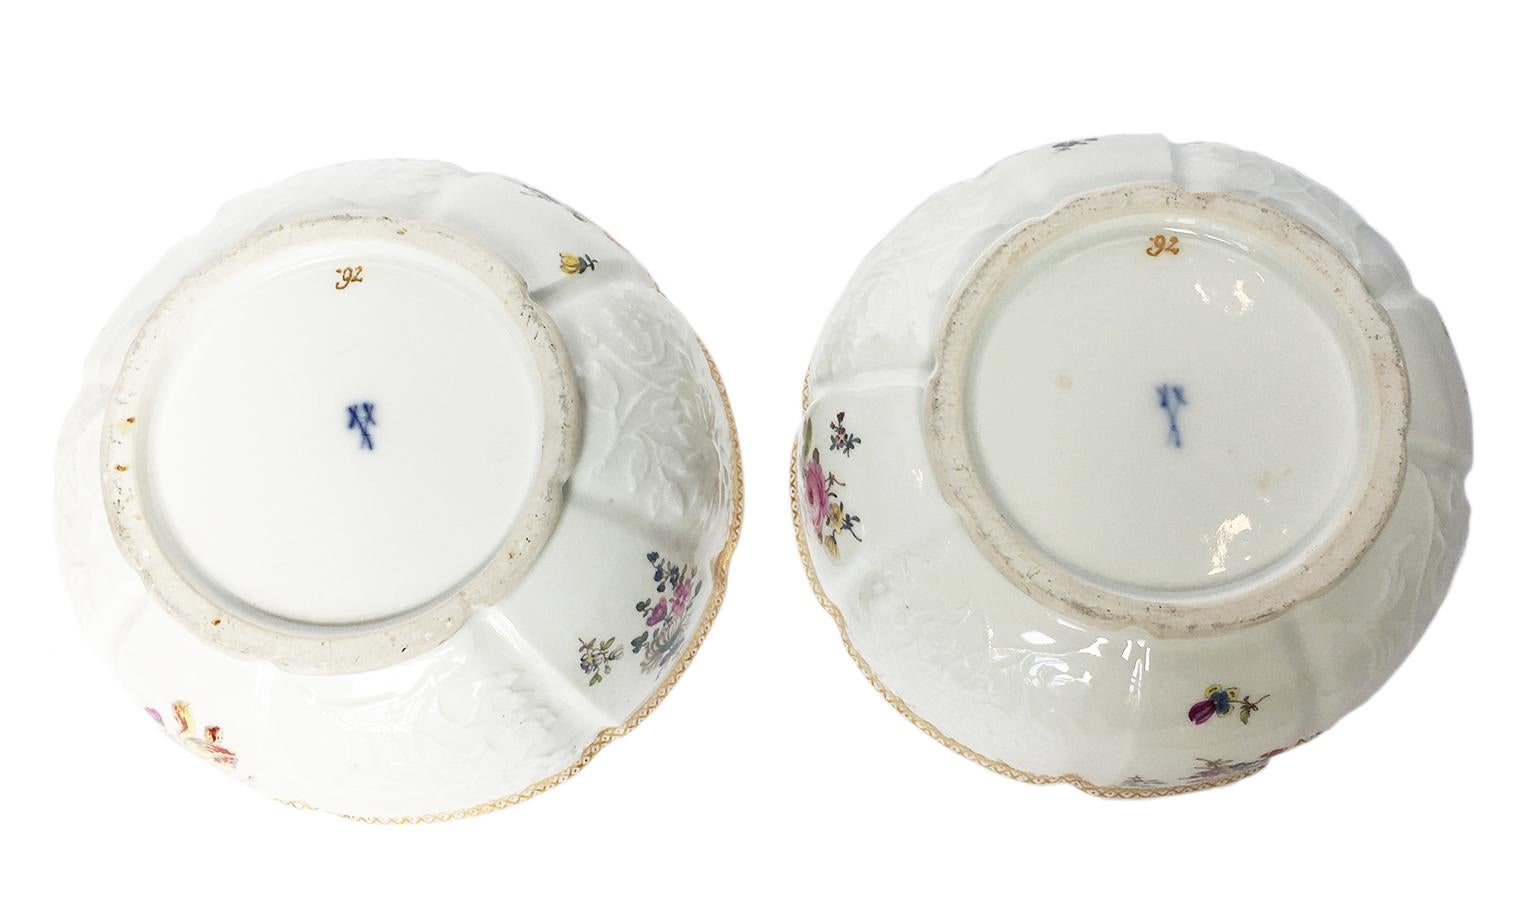 Ancient Meissen Pair of Porcelain Sugar Bowls with Flower Knobs, Circa 1760 For Sale 6